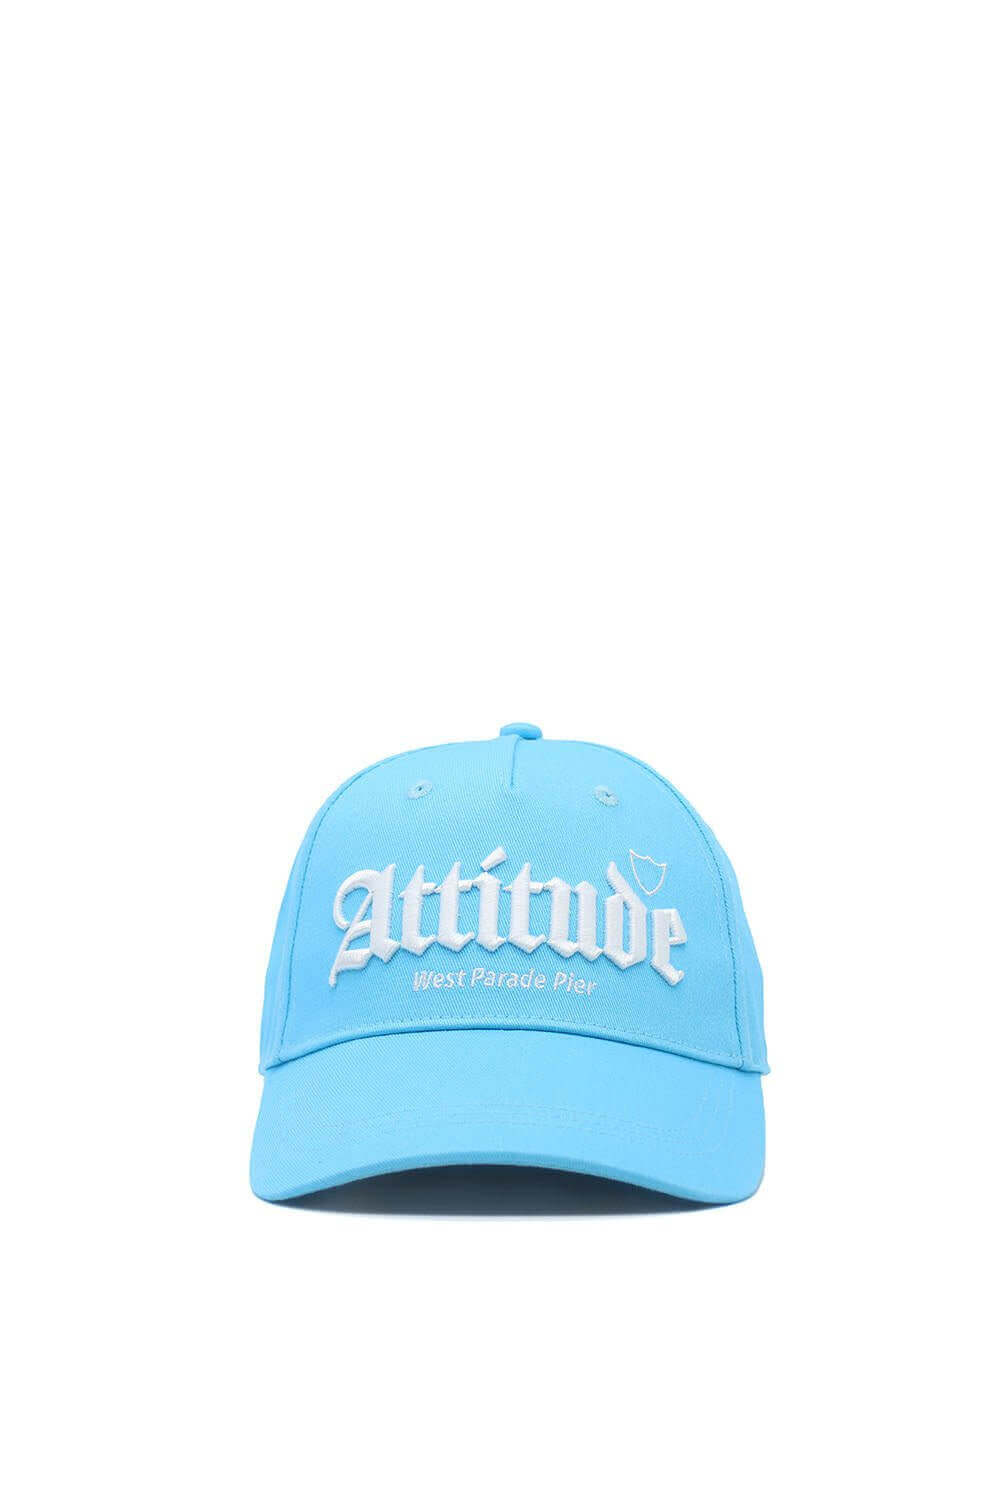 ATTITUDE CAP Blue baseball cap , round crown with eyelets , Attitude logo embroidered on the front, adjustable strap on the back. One size fits all. 100% cotton. HTC LOS ANGELES